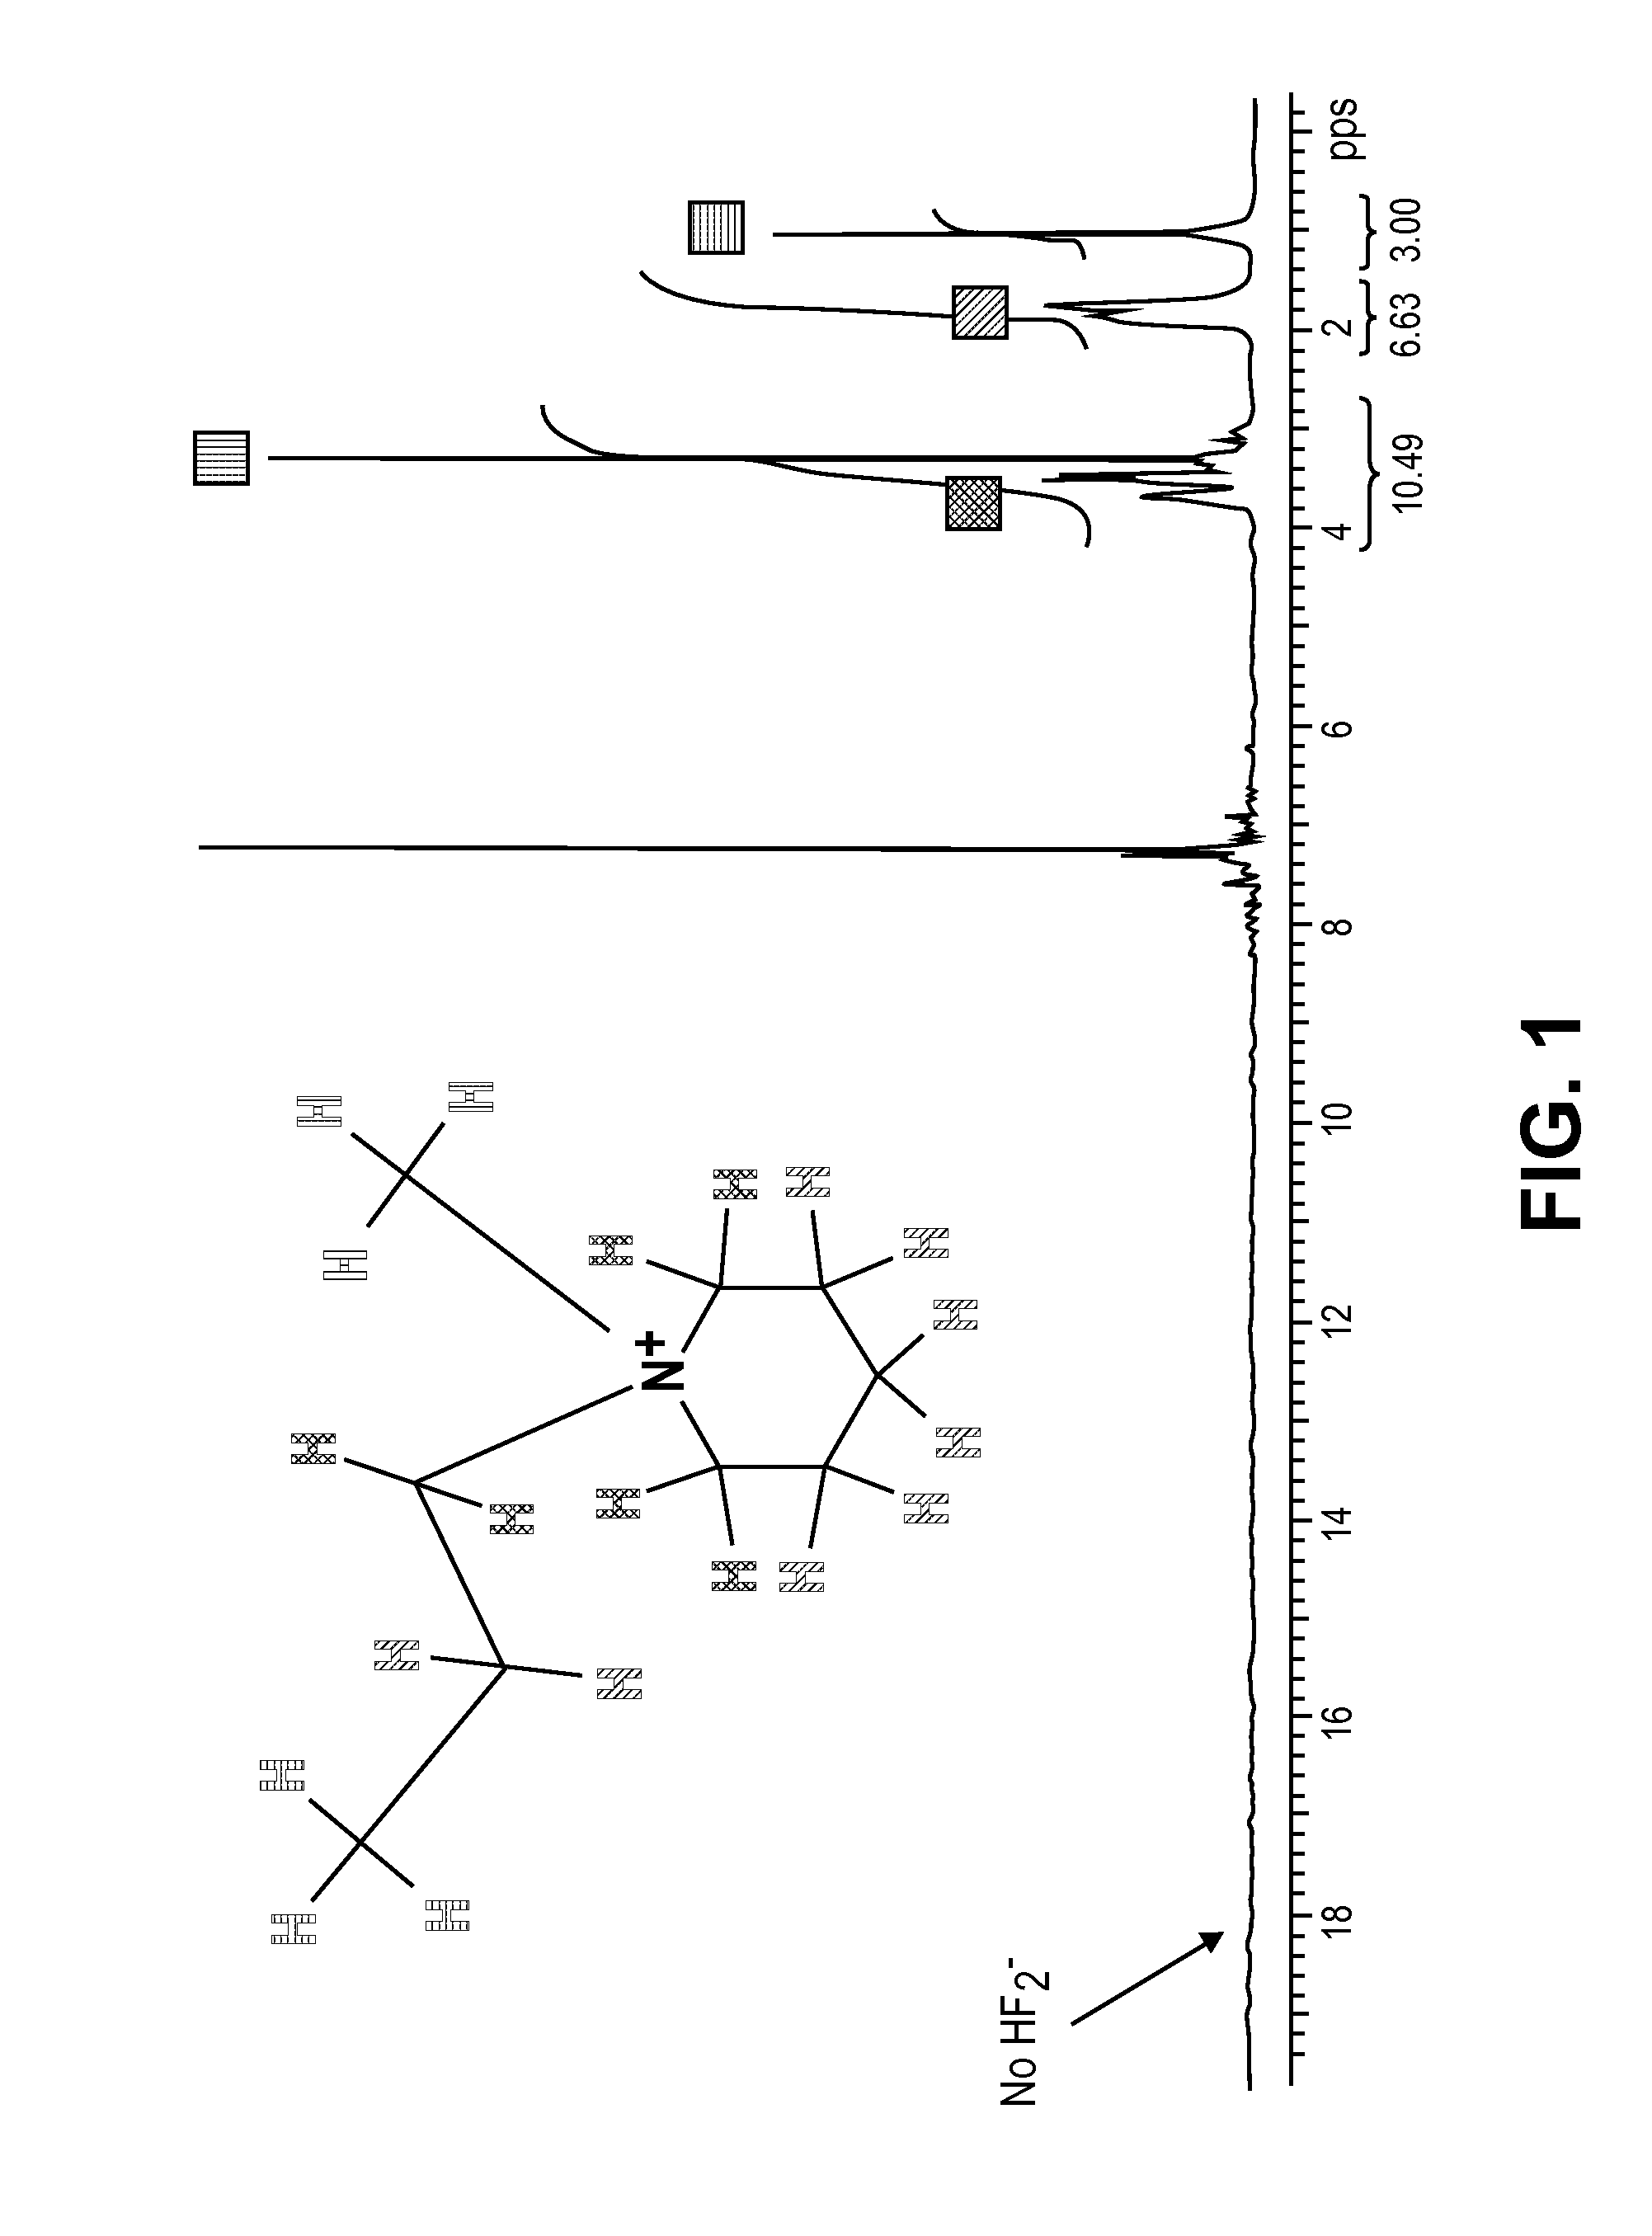 Fluoride Ion Battery Electrolyte Compositions